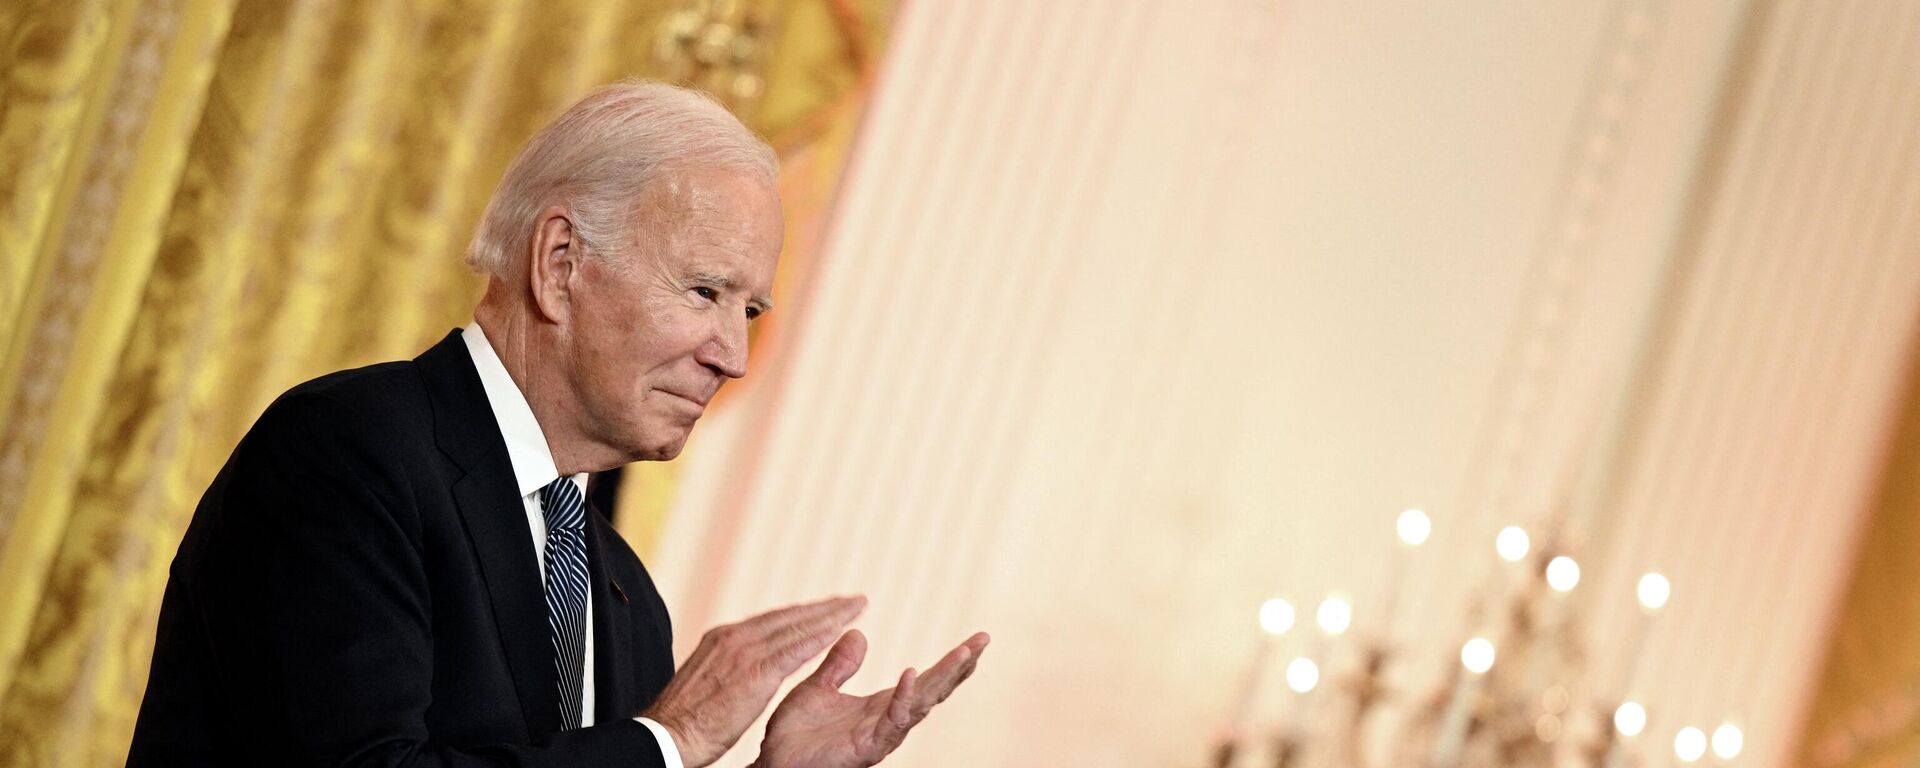 US President Joe Biden claps as he hosts a reception to celebrate Diwali in the East Room of the White House in Washington, DC, on October 24, 2022 - Sputnik International, 1920, 25.10.2022